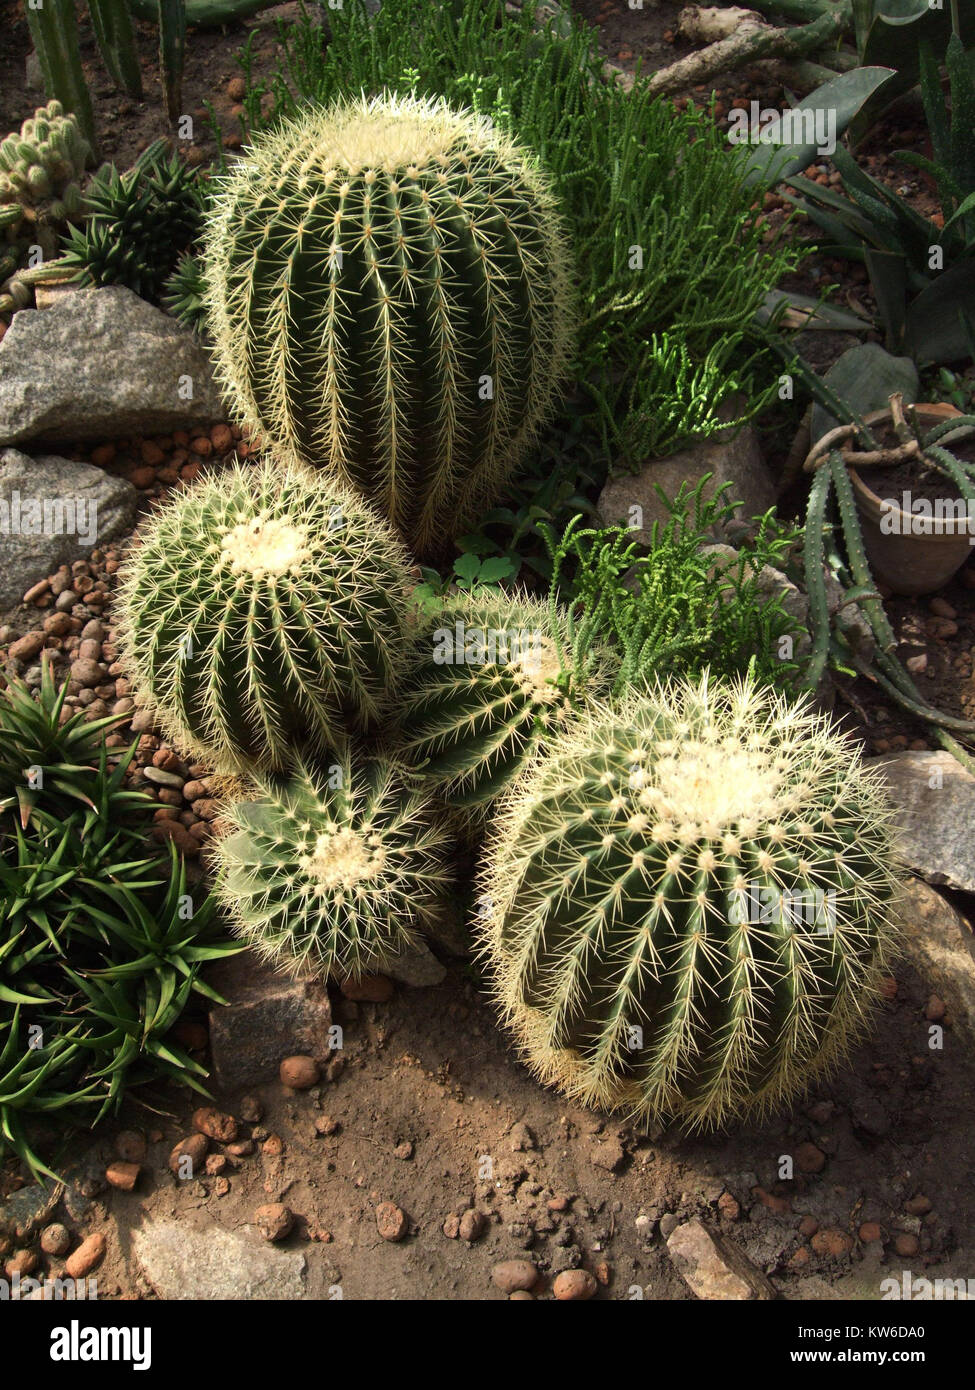 Golden cactus in botanical garden with variety plants. Stock Photo